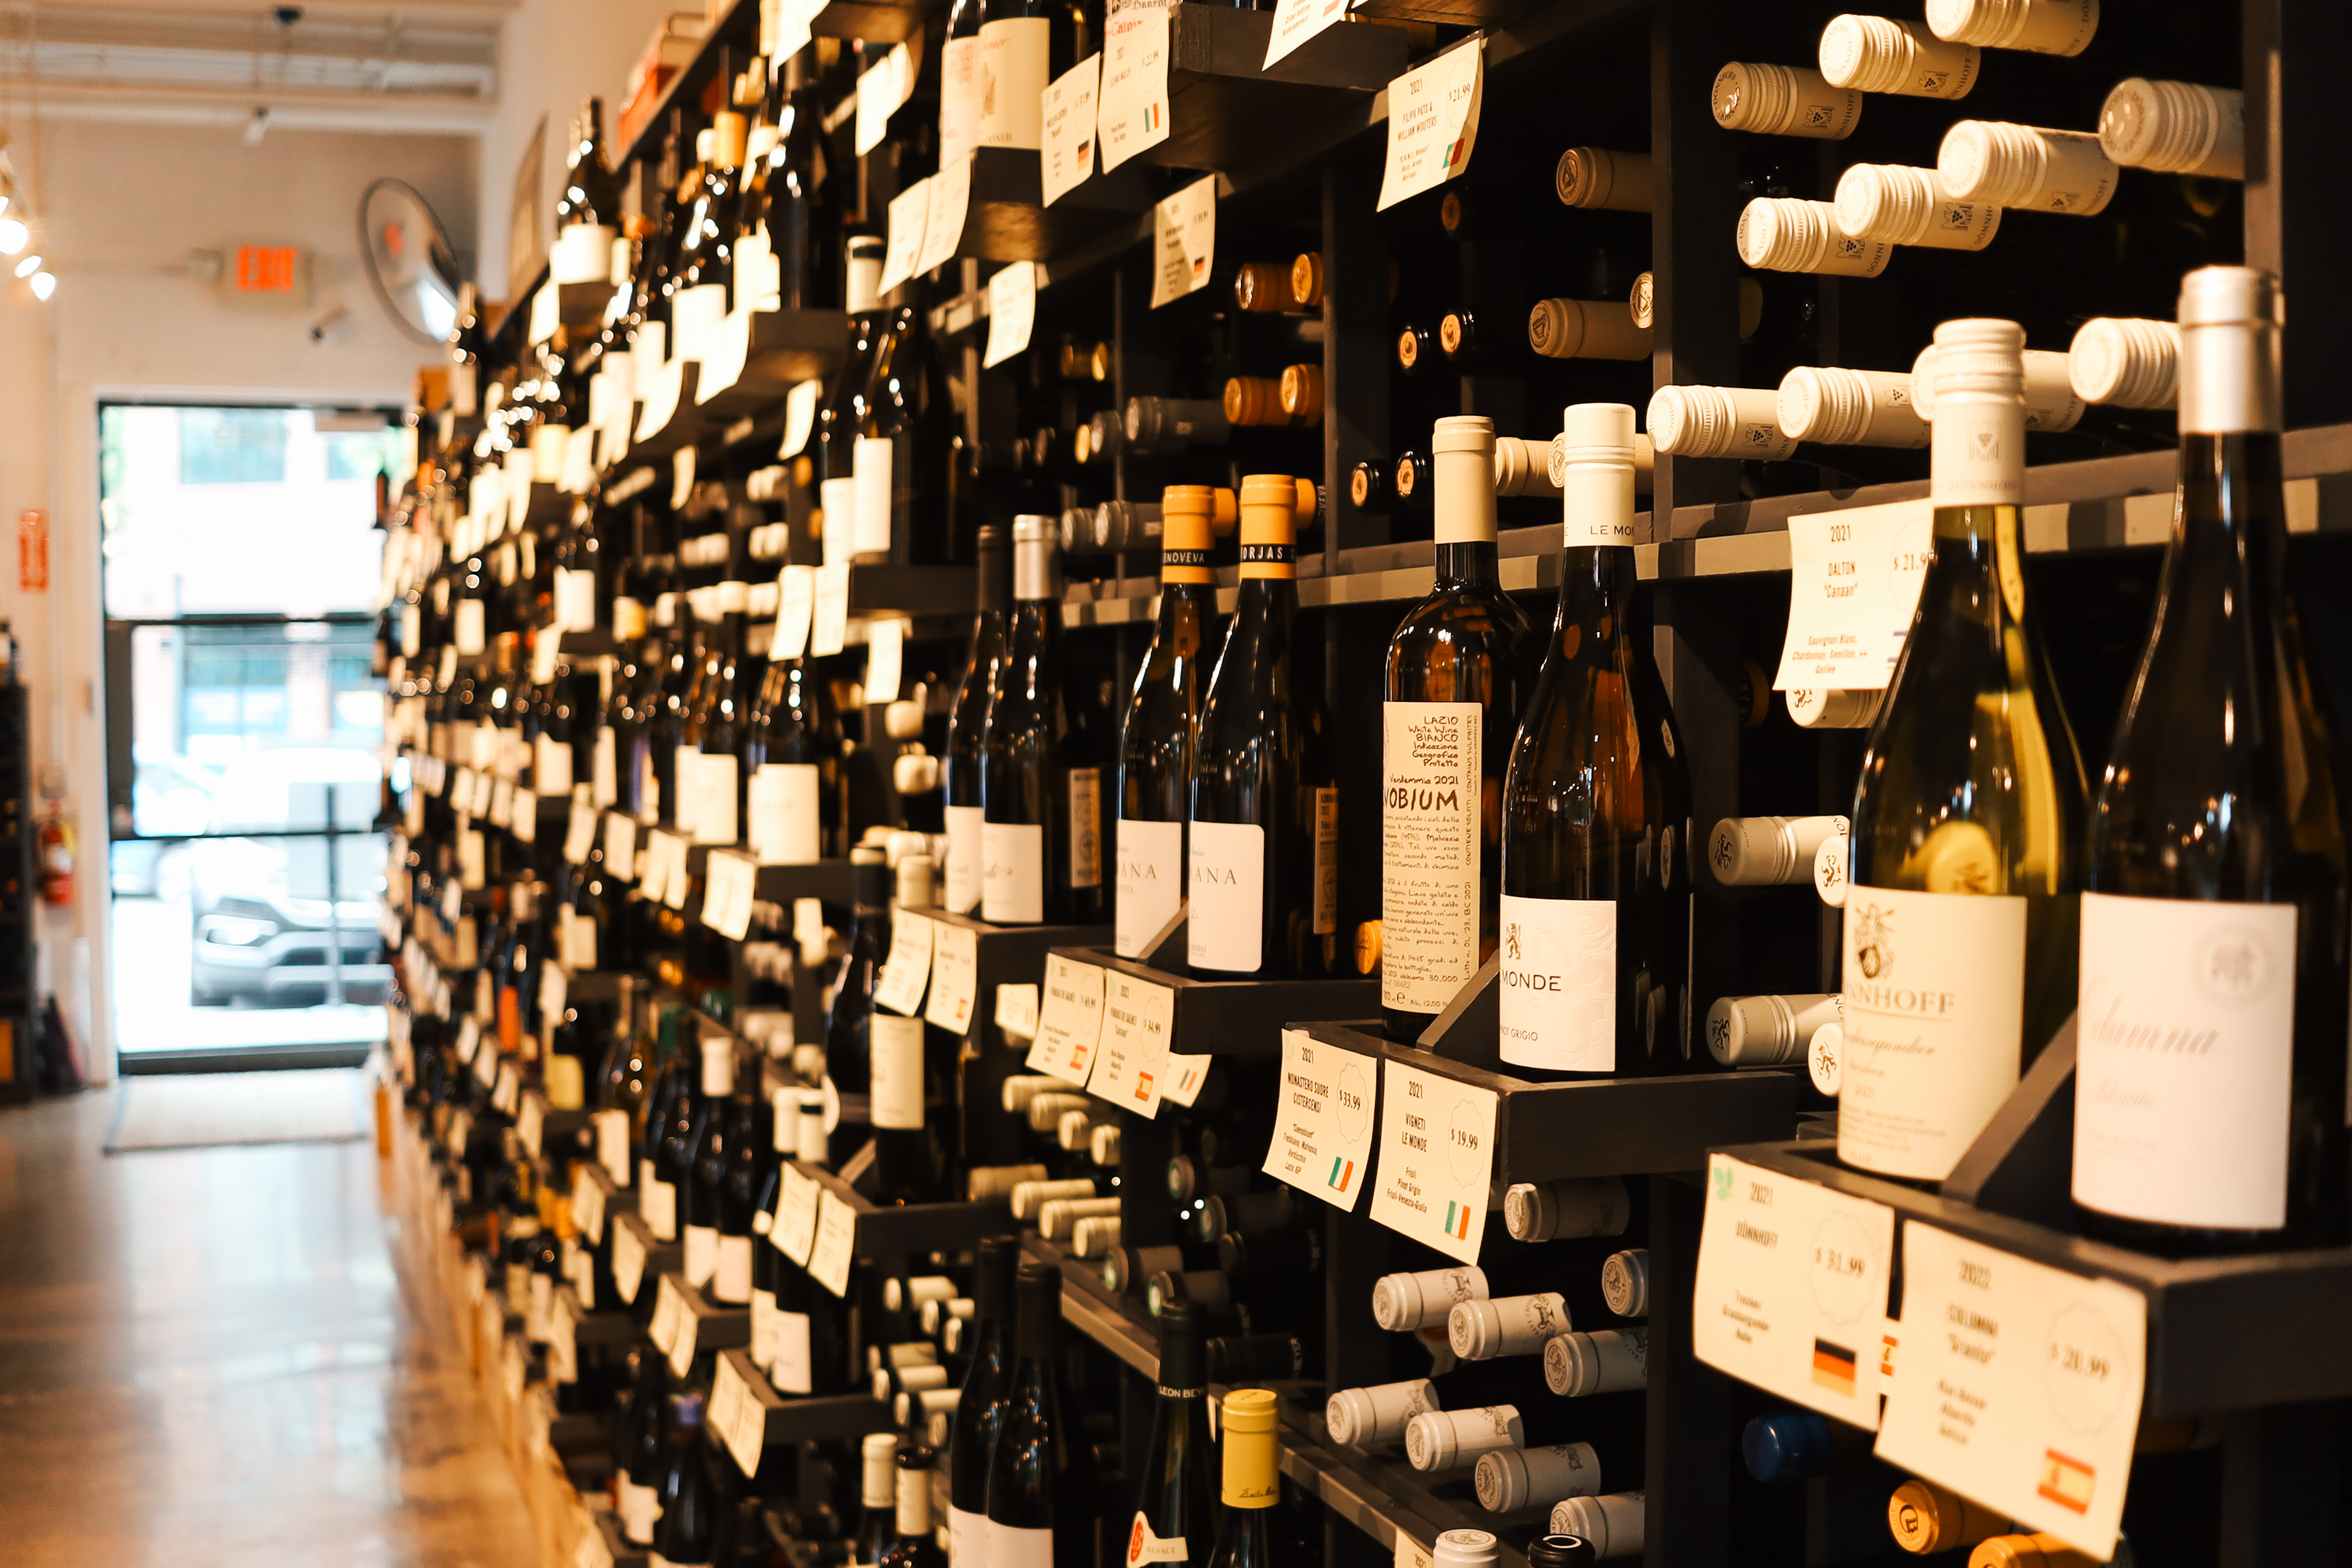 Rows of wine bottles in a shop with a few labels visible.